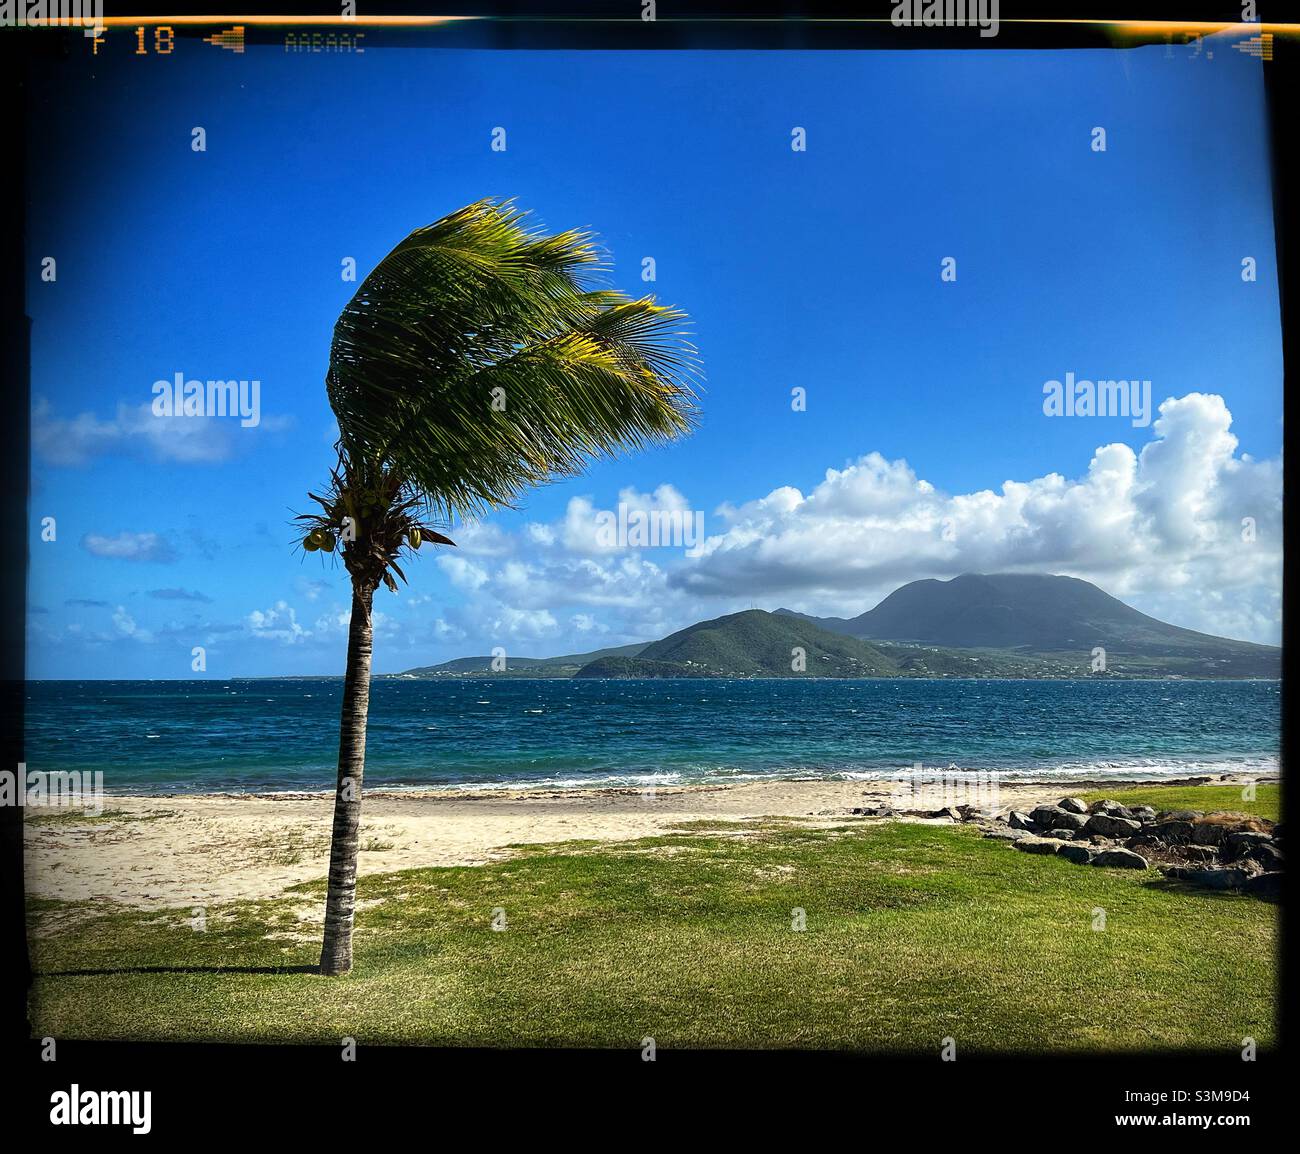 View of Mount Nevis Volcano from St.Kitts in the West Indies with a palm tree on Banana Bay Beach Stock Photo